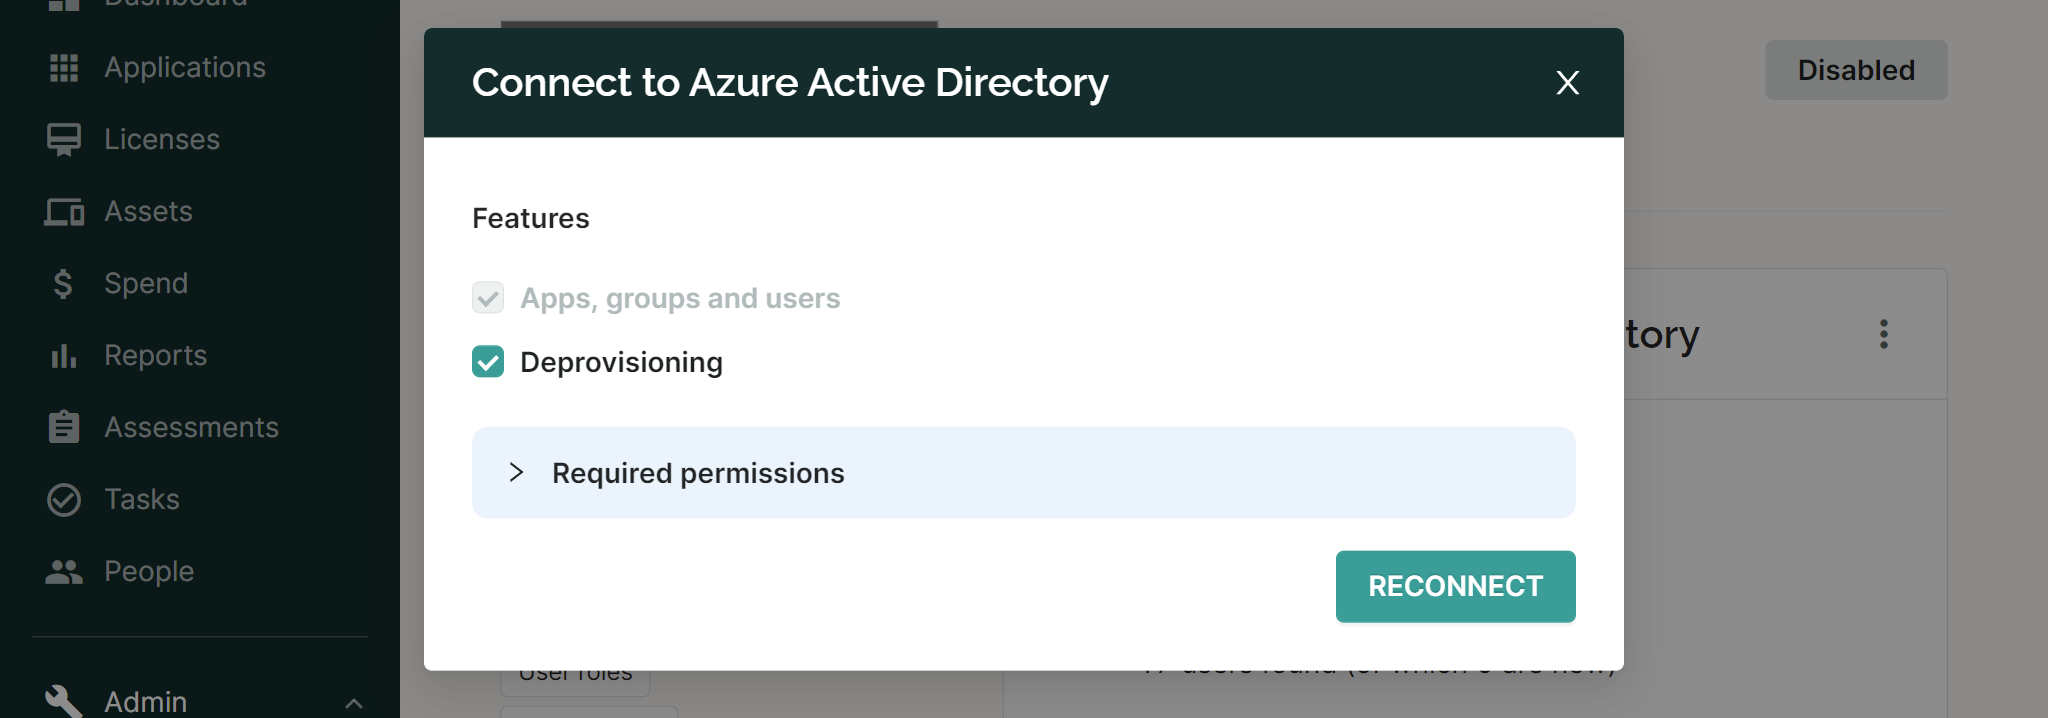 Reconnecting the Azure Active Directory integration